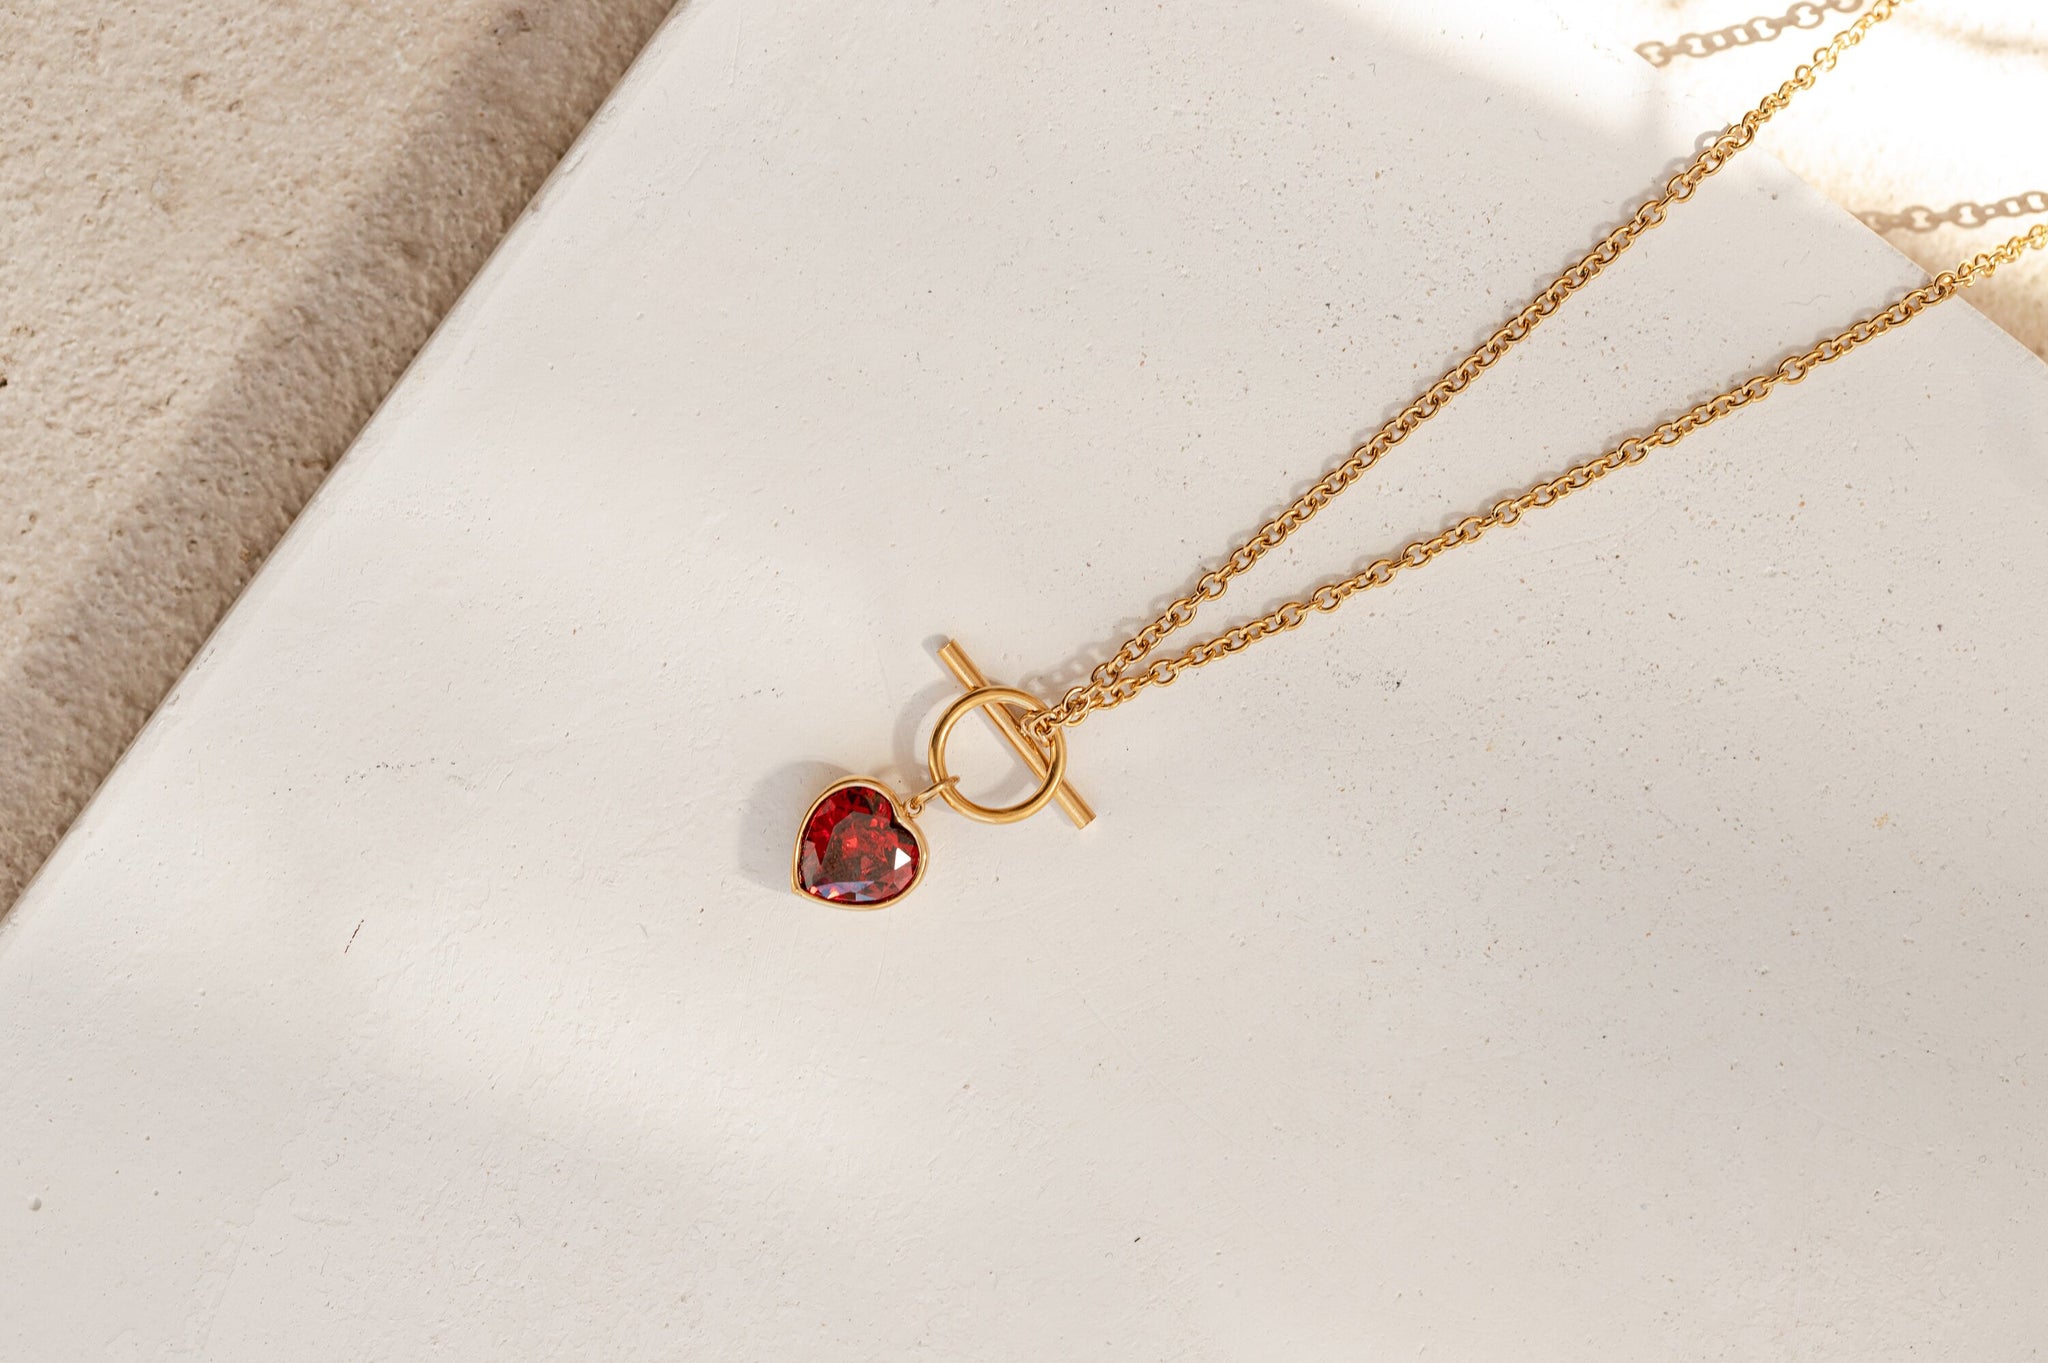 Zirconia Heart Necklace, 18K Gold, OT Necklace, Mothers Day Gift, Garnet Stone Necklace, Mother Necklace, Dainty Necklace, Gift For Mom